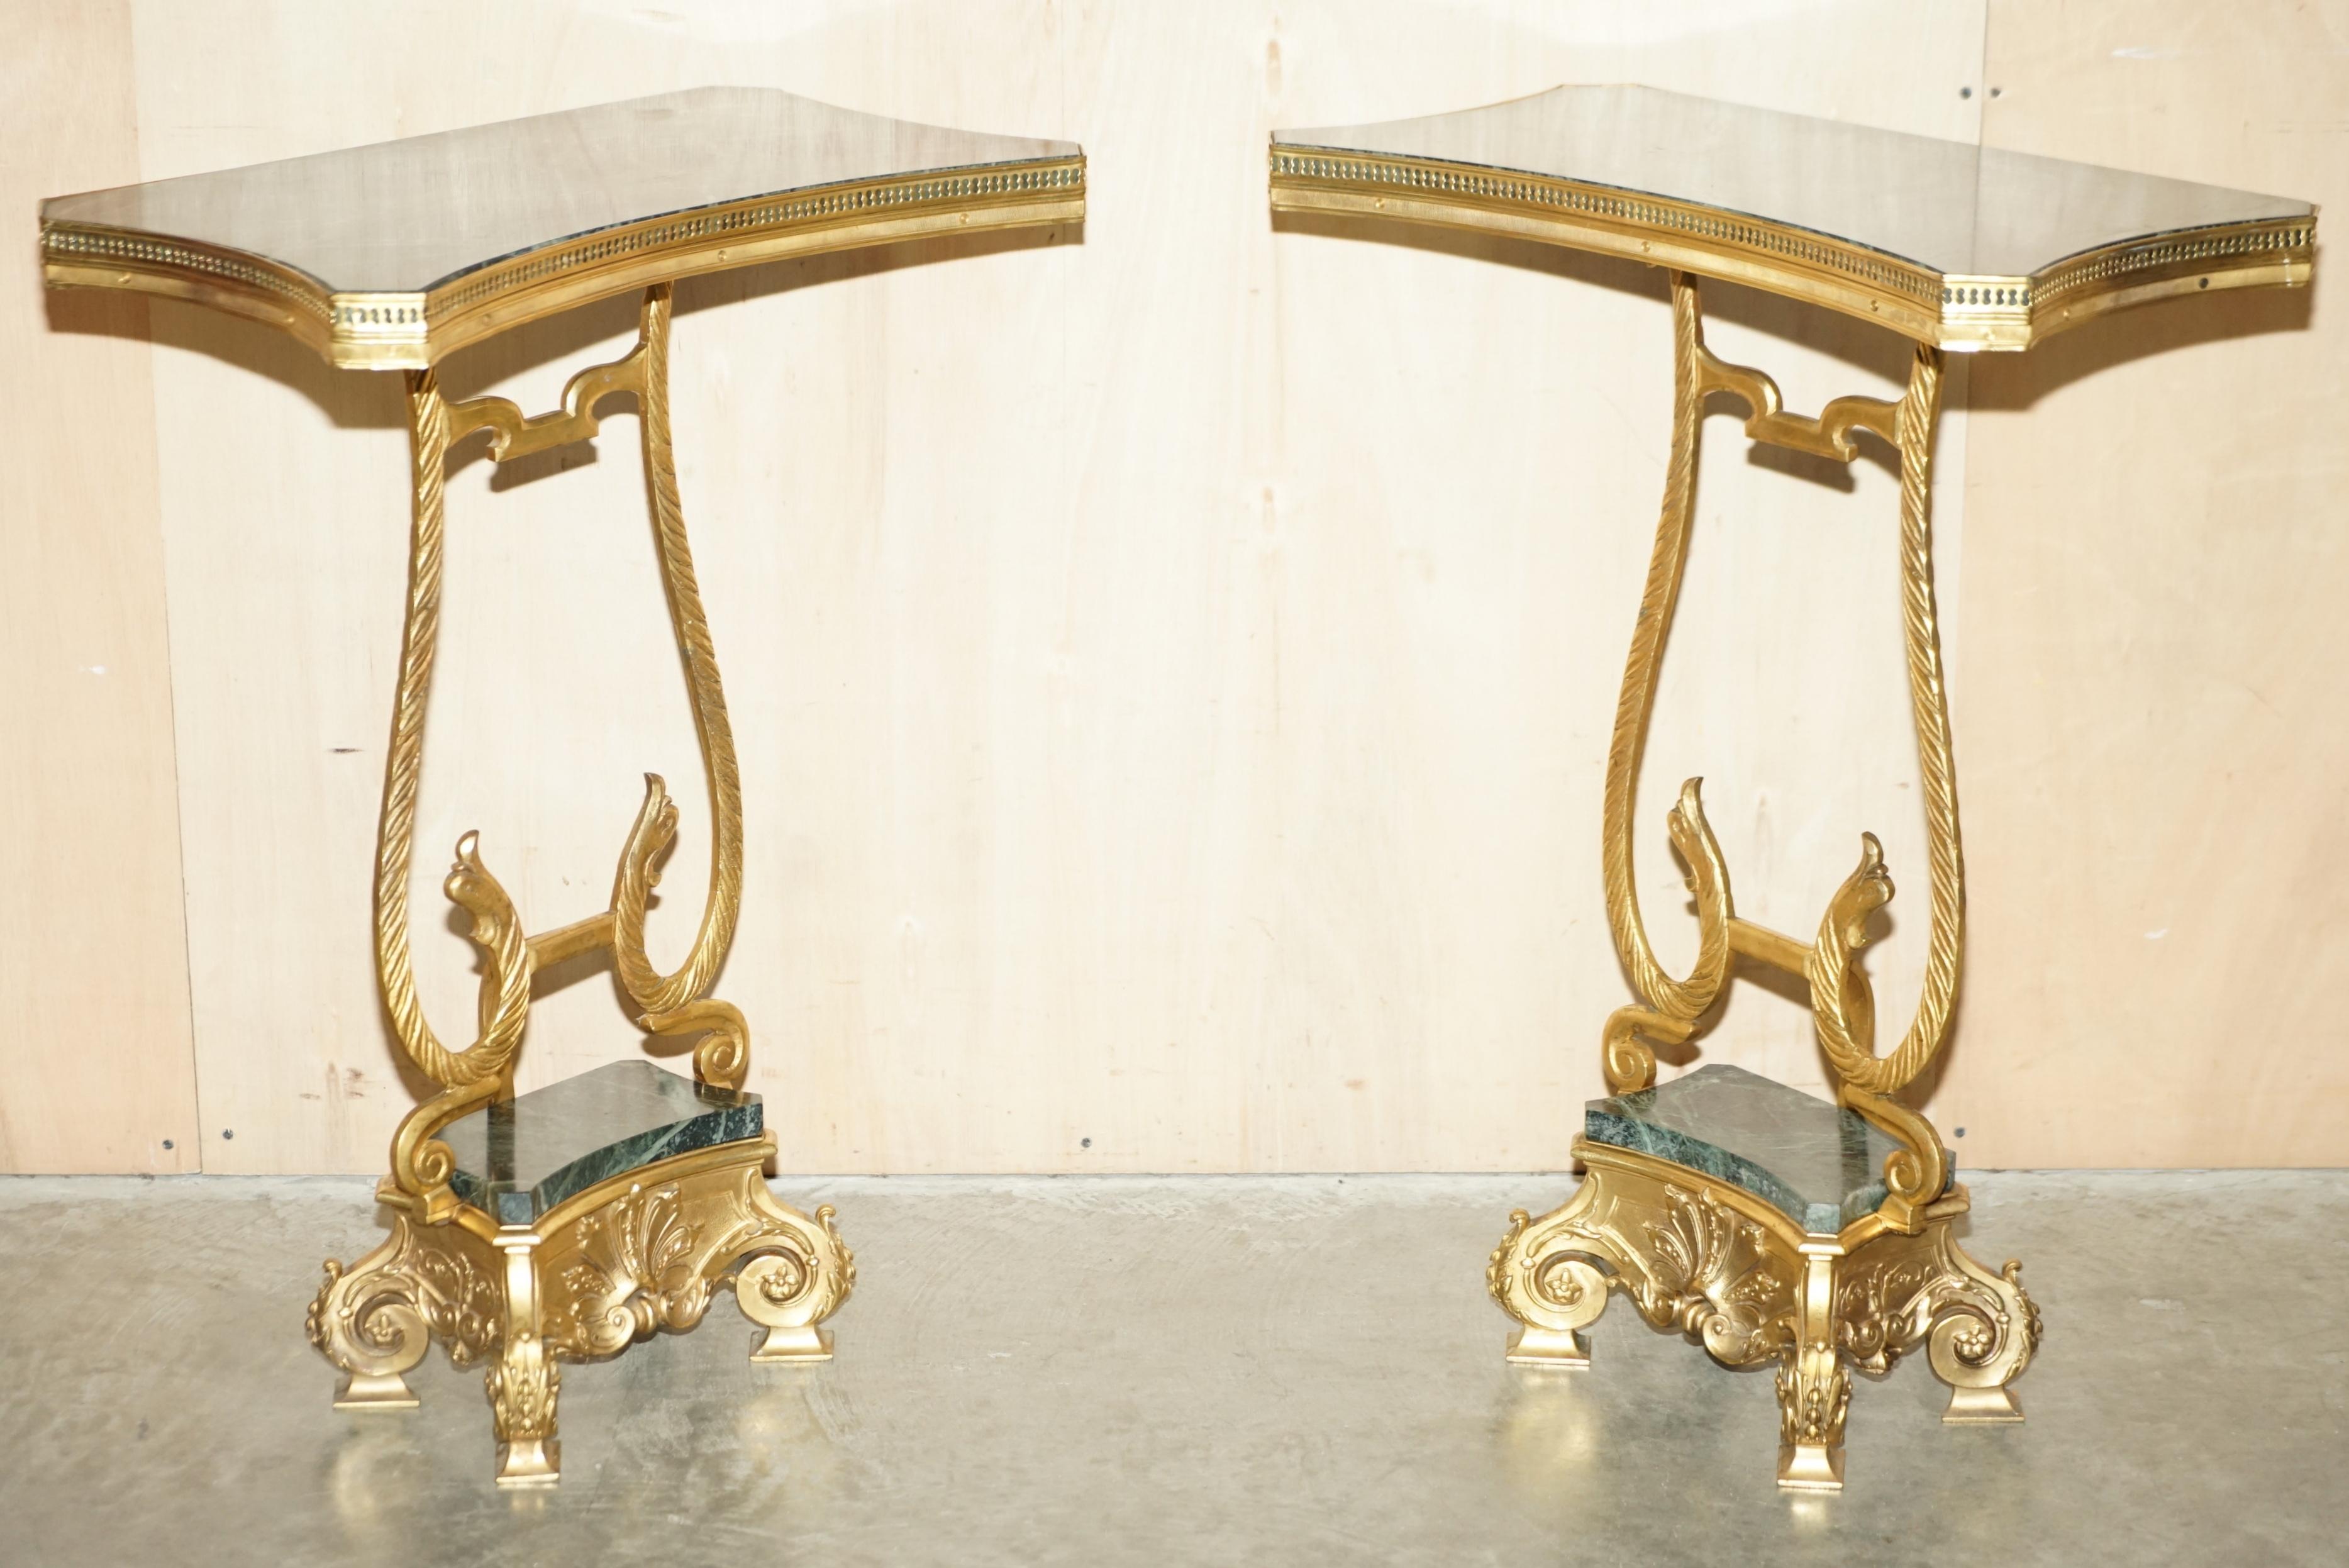 We are delighted to offer for sale this exquisite pair of circa 1880 French solid brass and green marble side end tables 

A very good looking well-made and decorative pair, the frames are solid brass with a gilt finish, the tops and bases are